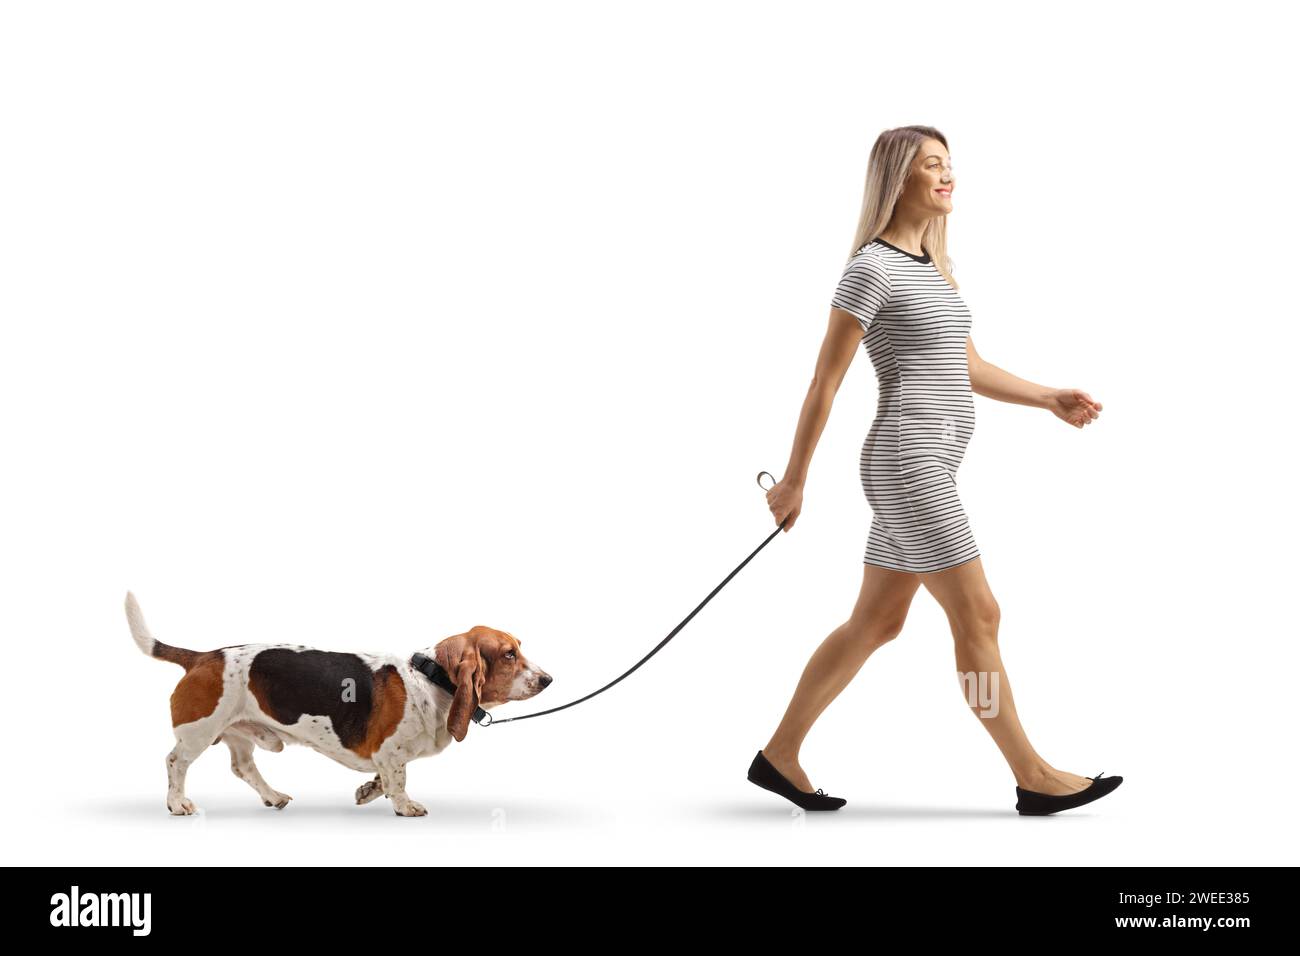 Full length profile shot of a casual young woman walking a basset hound dog on a lead isolated on white background Stock Photo